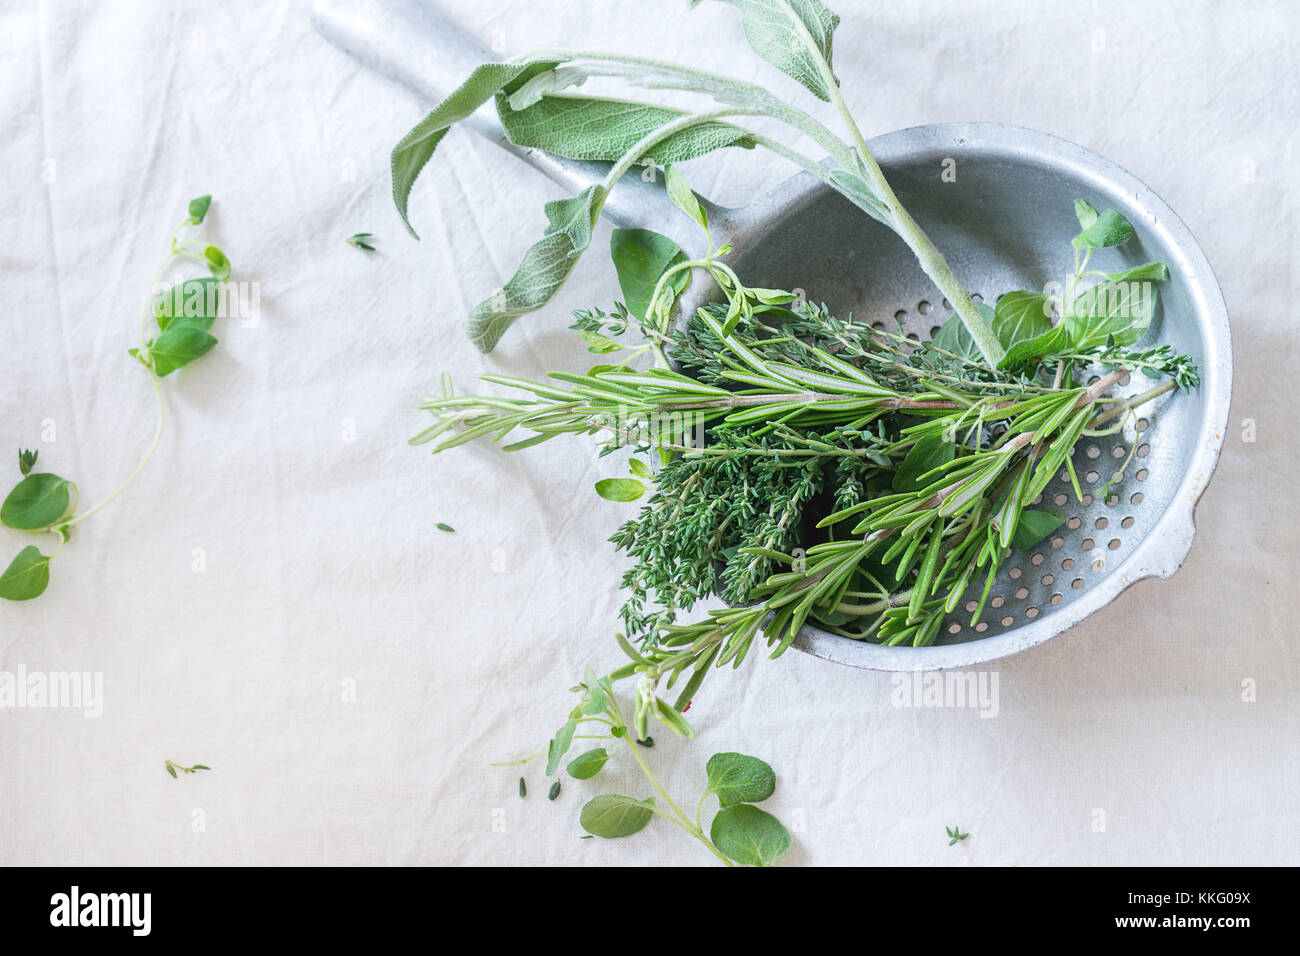 Assortment of fresh herbs thyme, rosemary, sage and oregano in old ...